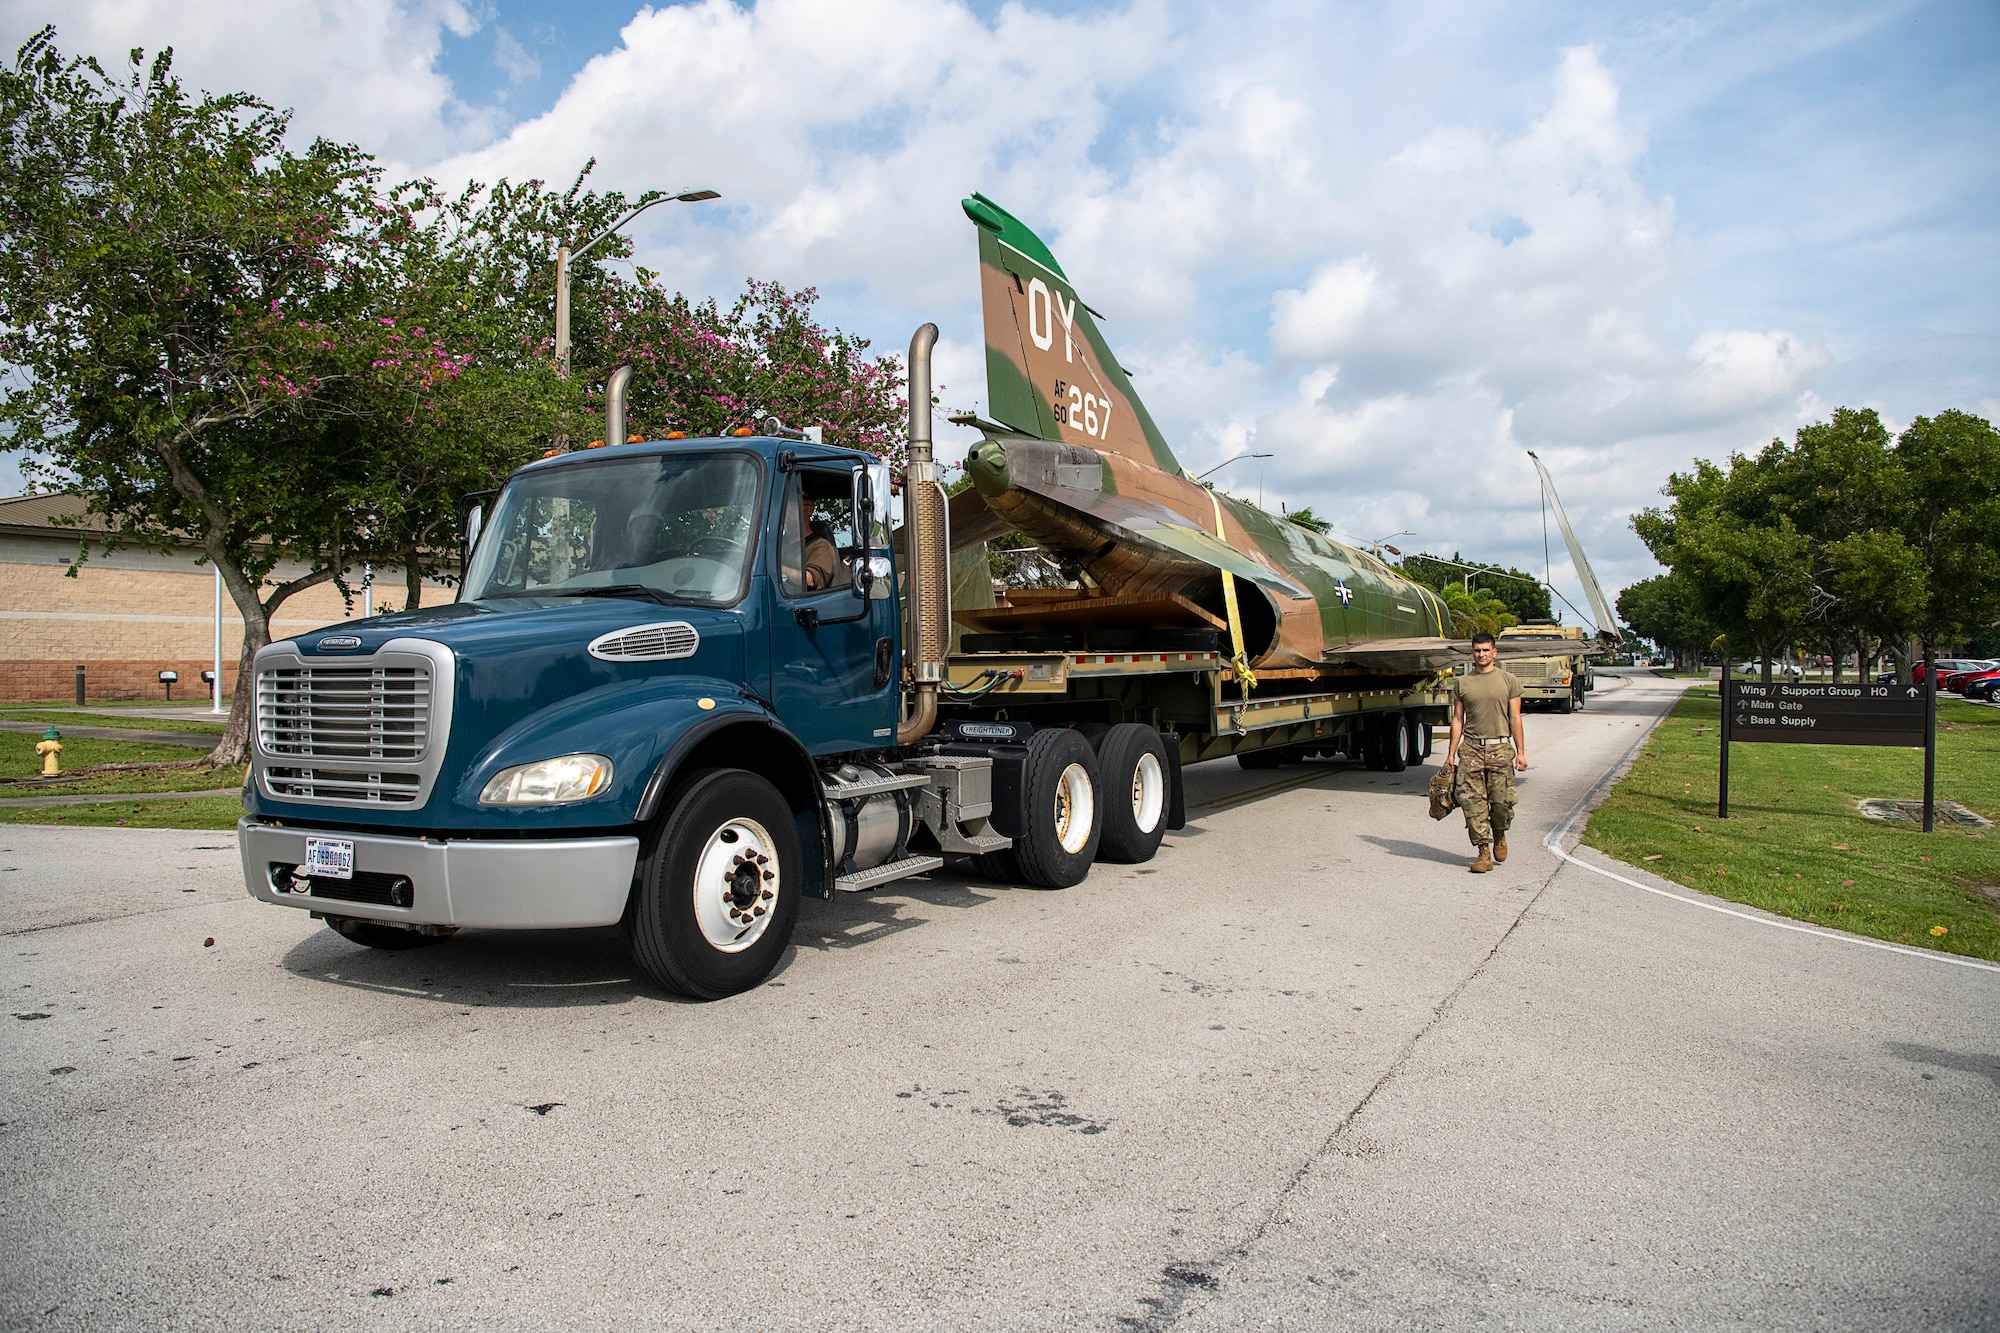 F-4D fighter jet serial number 66-0267 is transported by the 482nd Logistics Readiness Squadron and 482nd Maintenance Squadron personnel to the aircraft corrosion control facility at Homestead Air Reserve Base, Fla., on Oct. 28, 2021 (U.S. Air Force photo by Tim Norton)